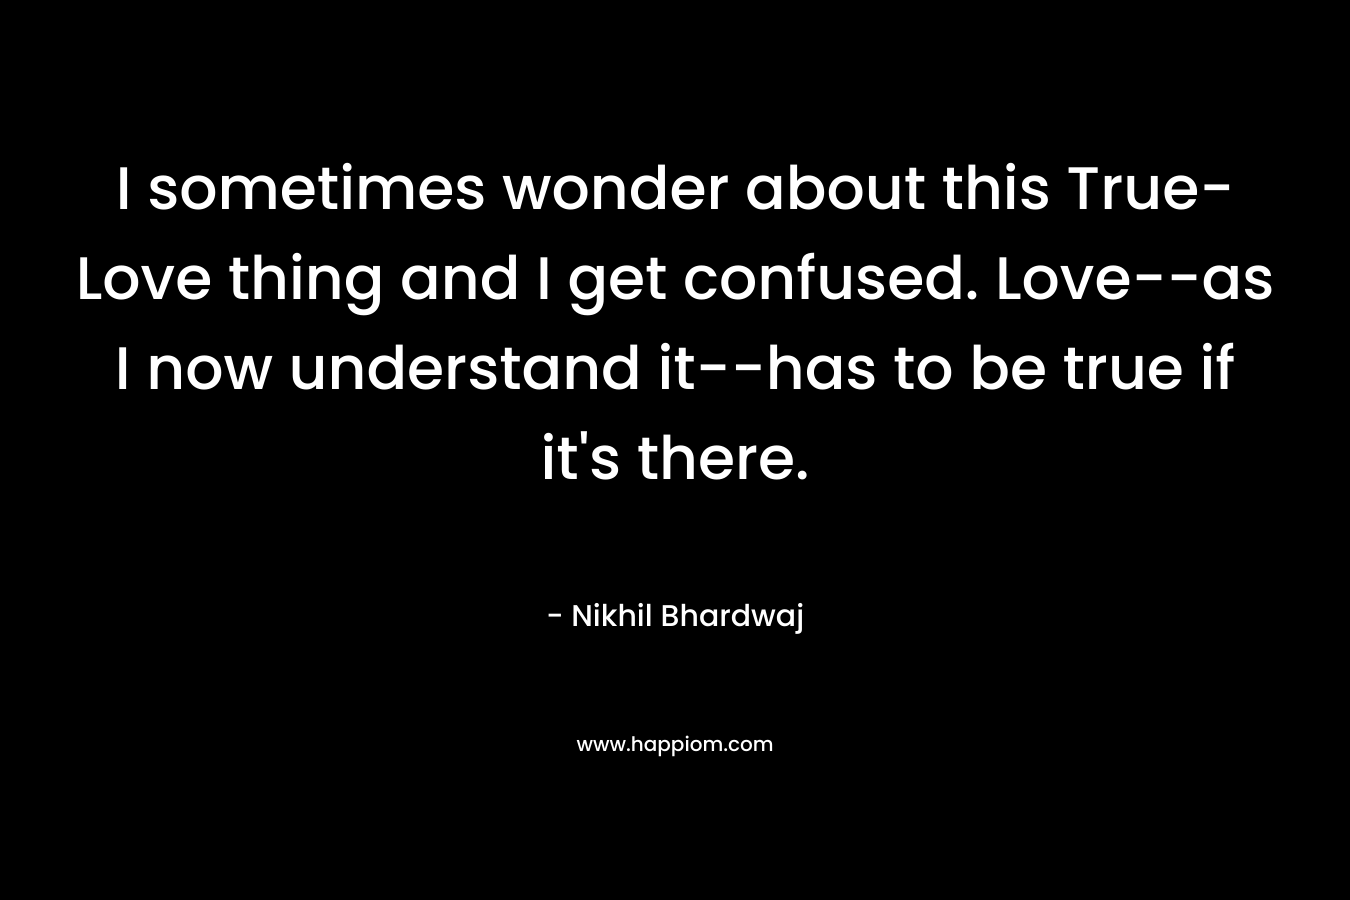 I sometimes wonder about this True-Love thing and I get confused. Love–as I now understand it–has to be true if it’s there. – Nikhil Bhardwaj